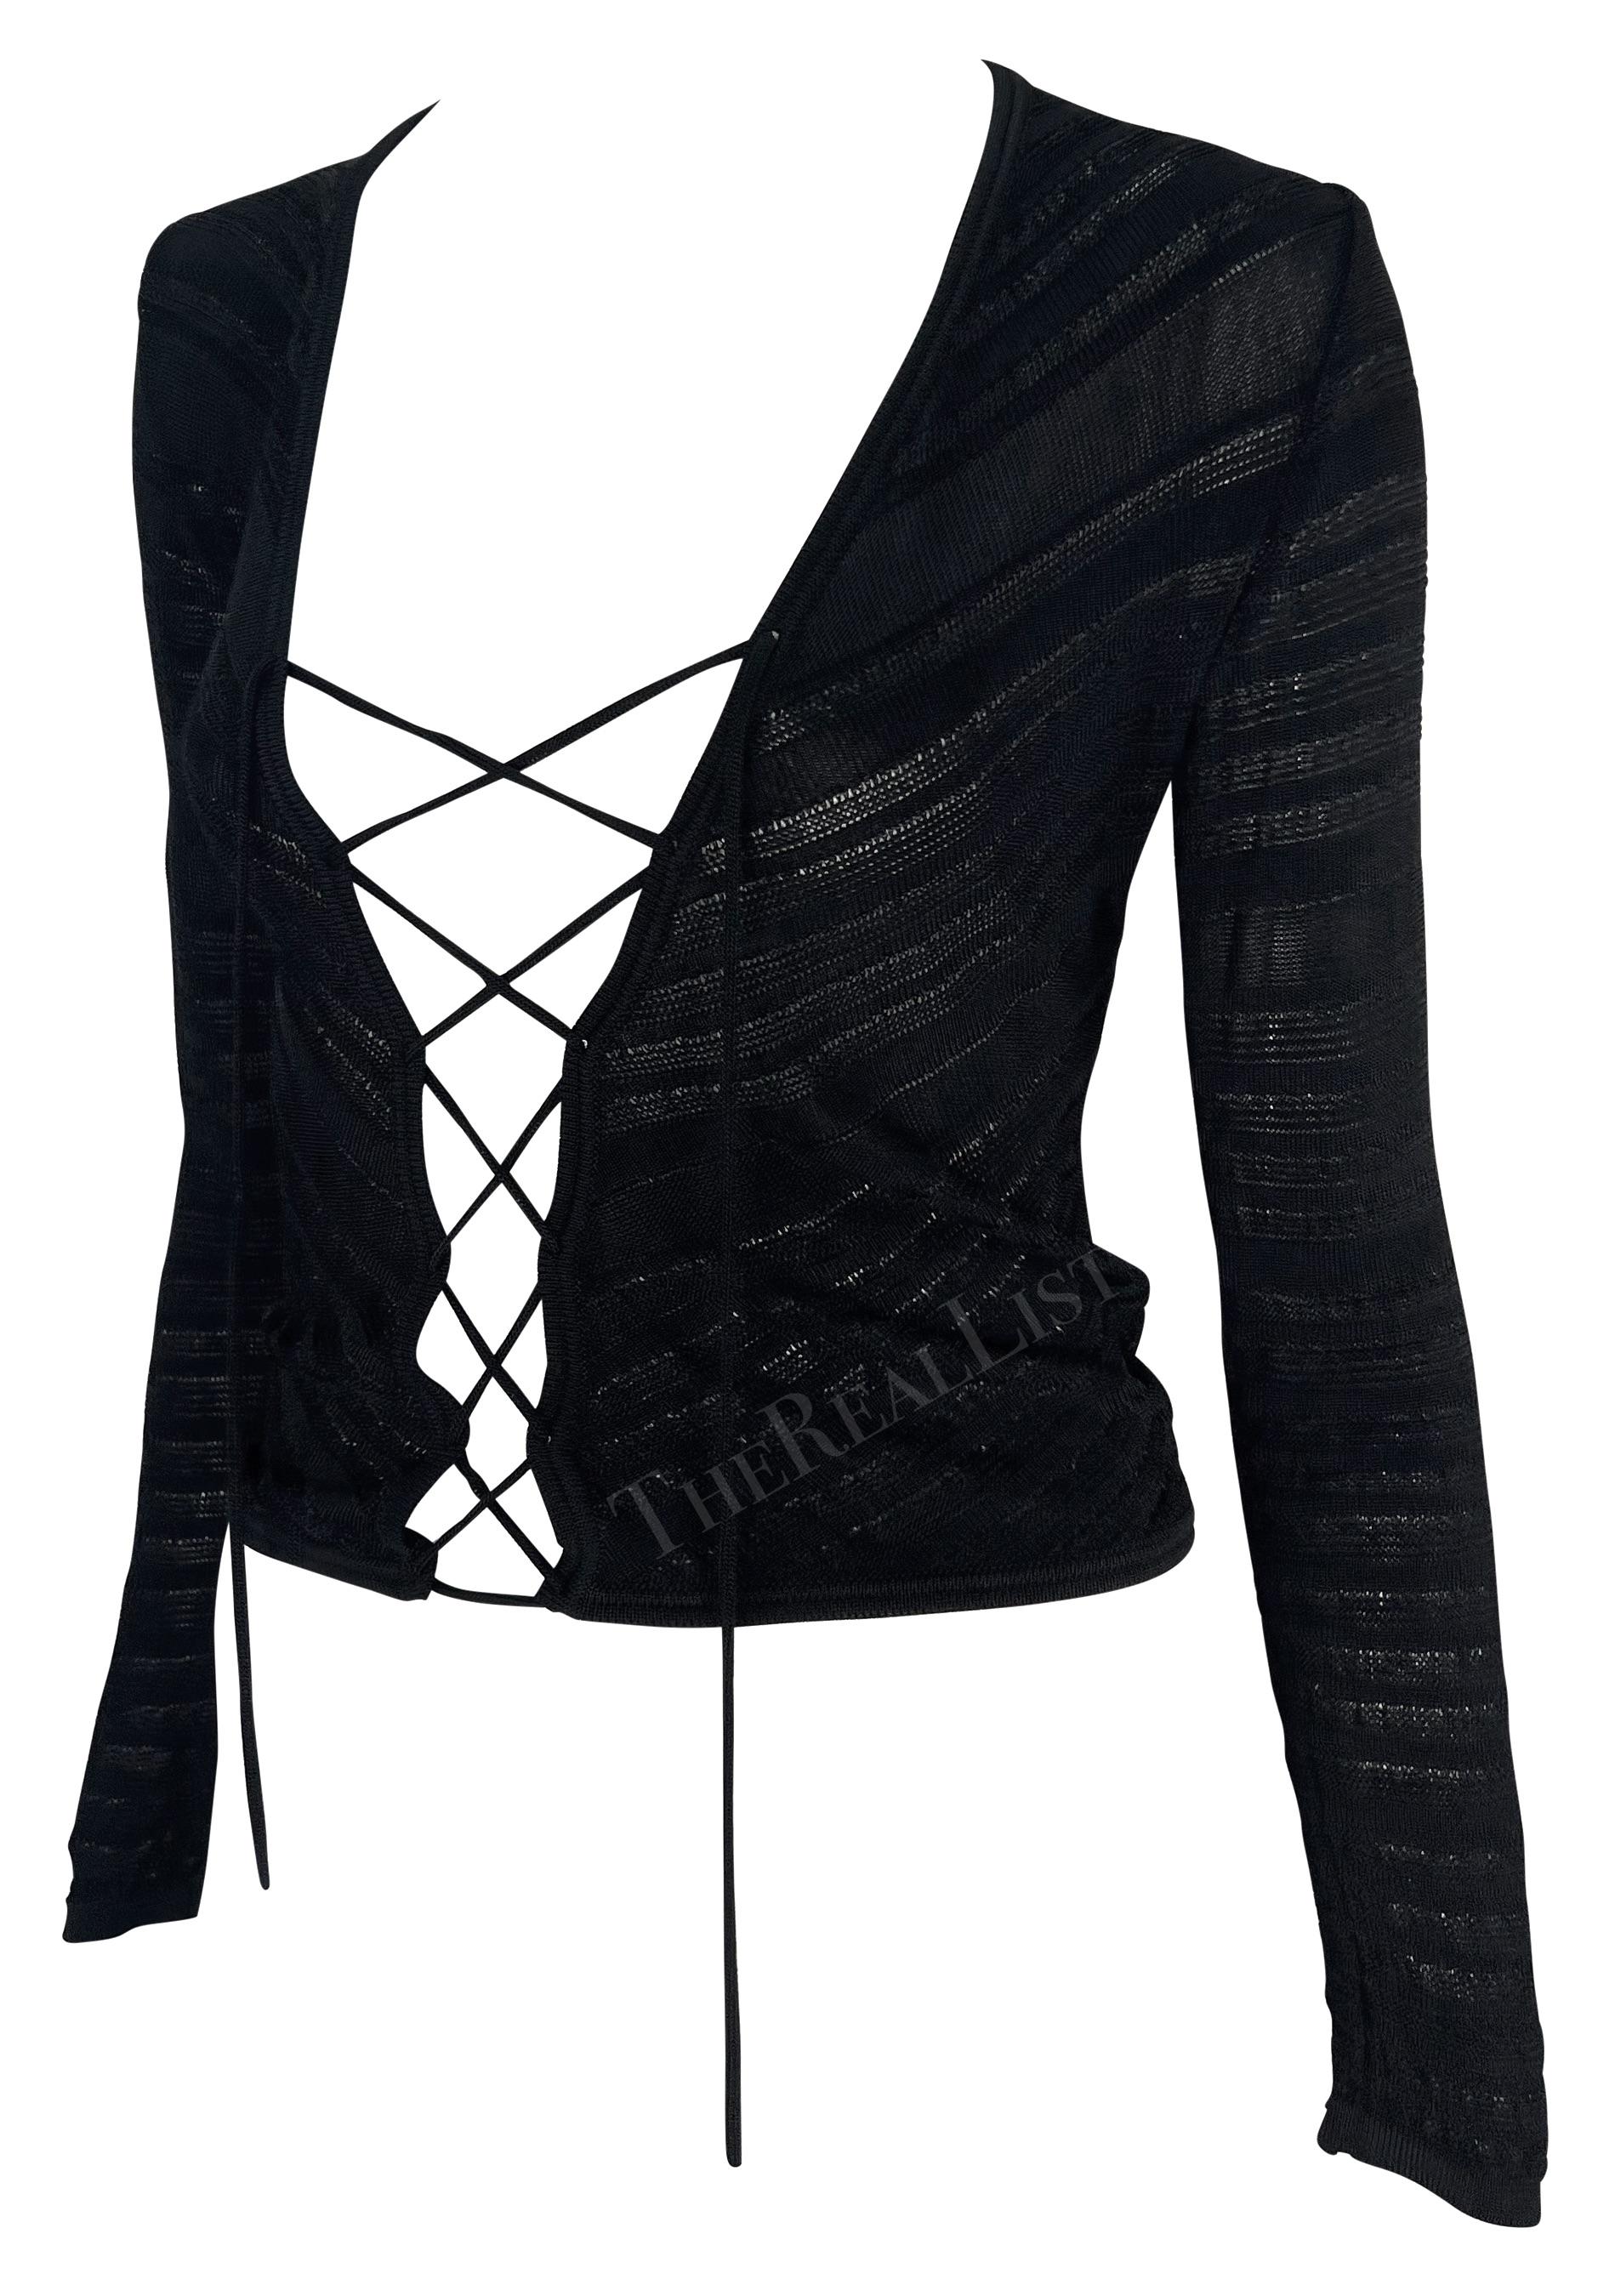 S/S 2002 Gianni Versace by Donatella Sheer Stretch Plunging Black Lace-Up Top For Sale 3